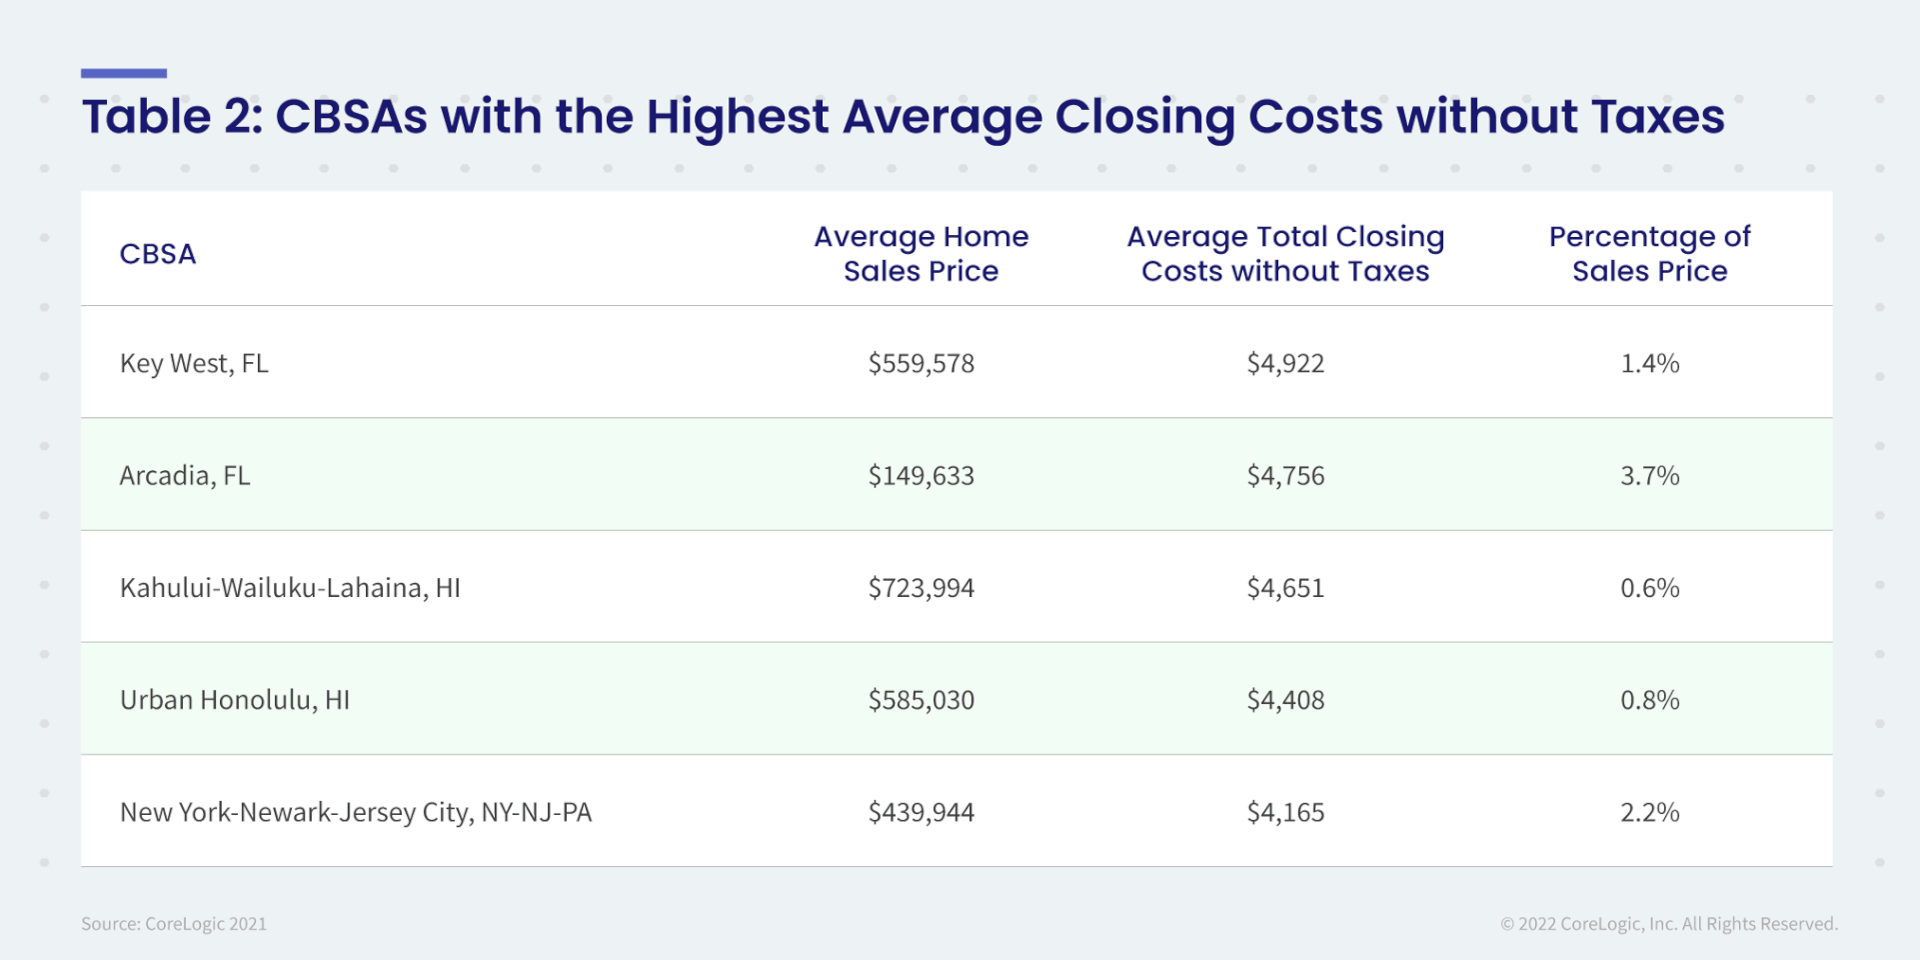 Table 2: CBSAs with the Highest Average Closing Costs without Taxes